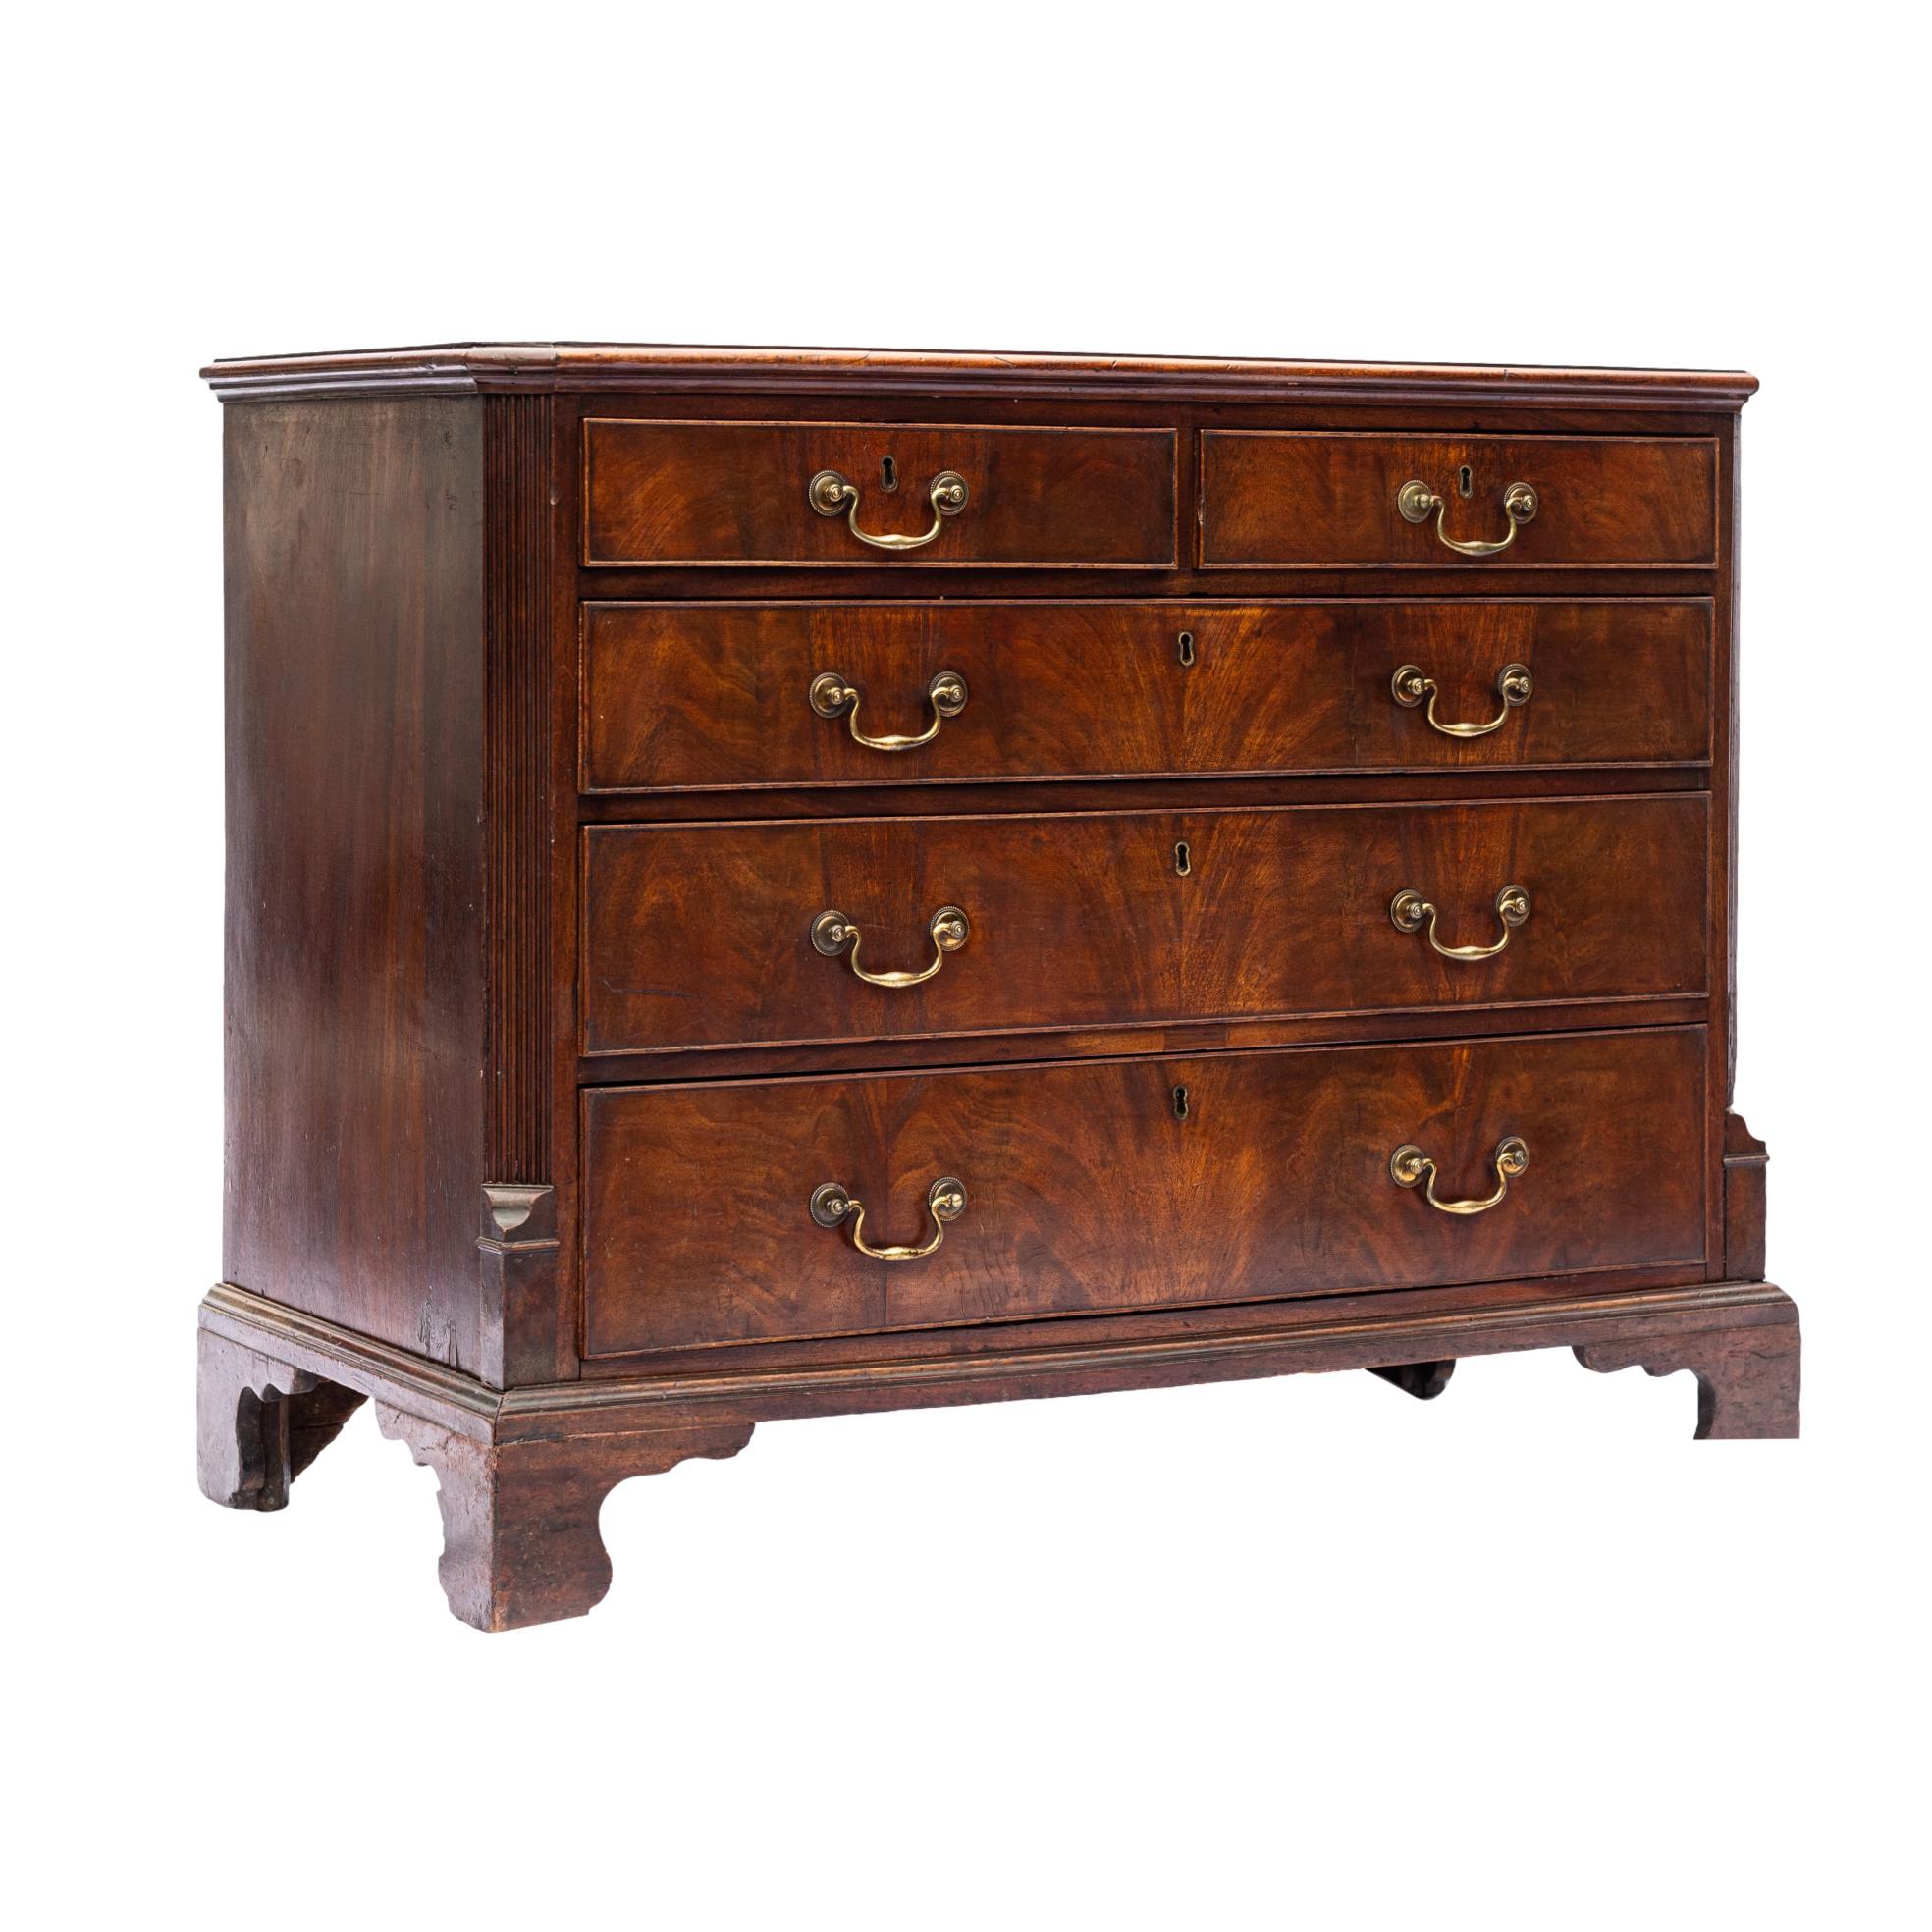 George III Mahogany Chest-of-Drawers, with a banded top, with two short drawers over three long graduated ones, each with cockbeading and oak linings, with canted and molded front corners and reeded posts, on the original ogee bracket feet, with